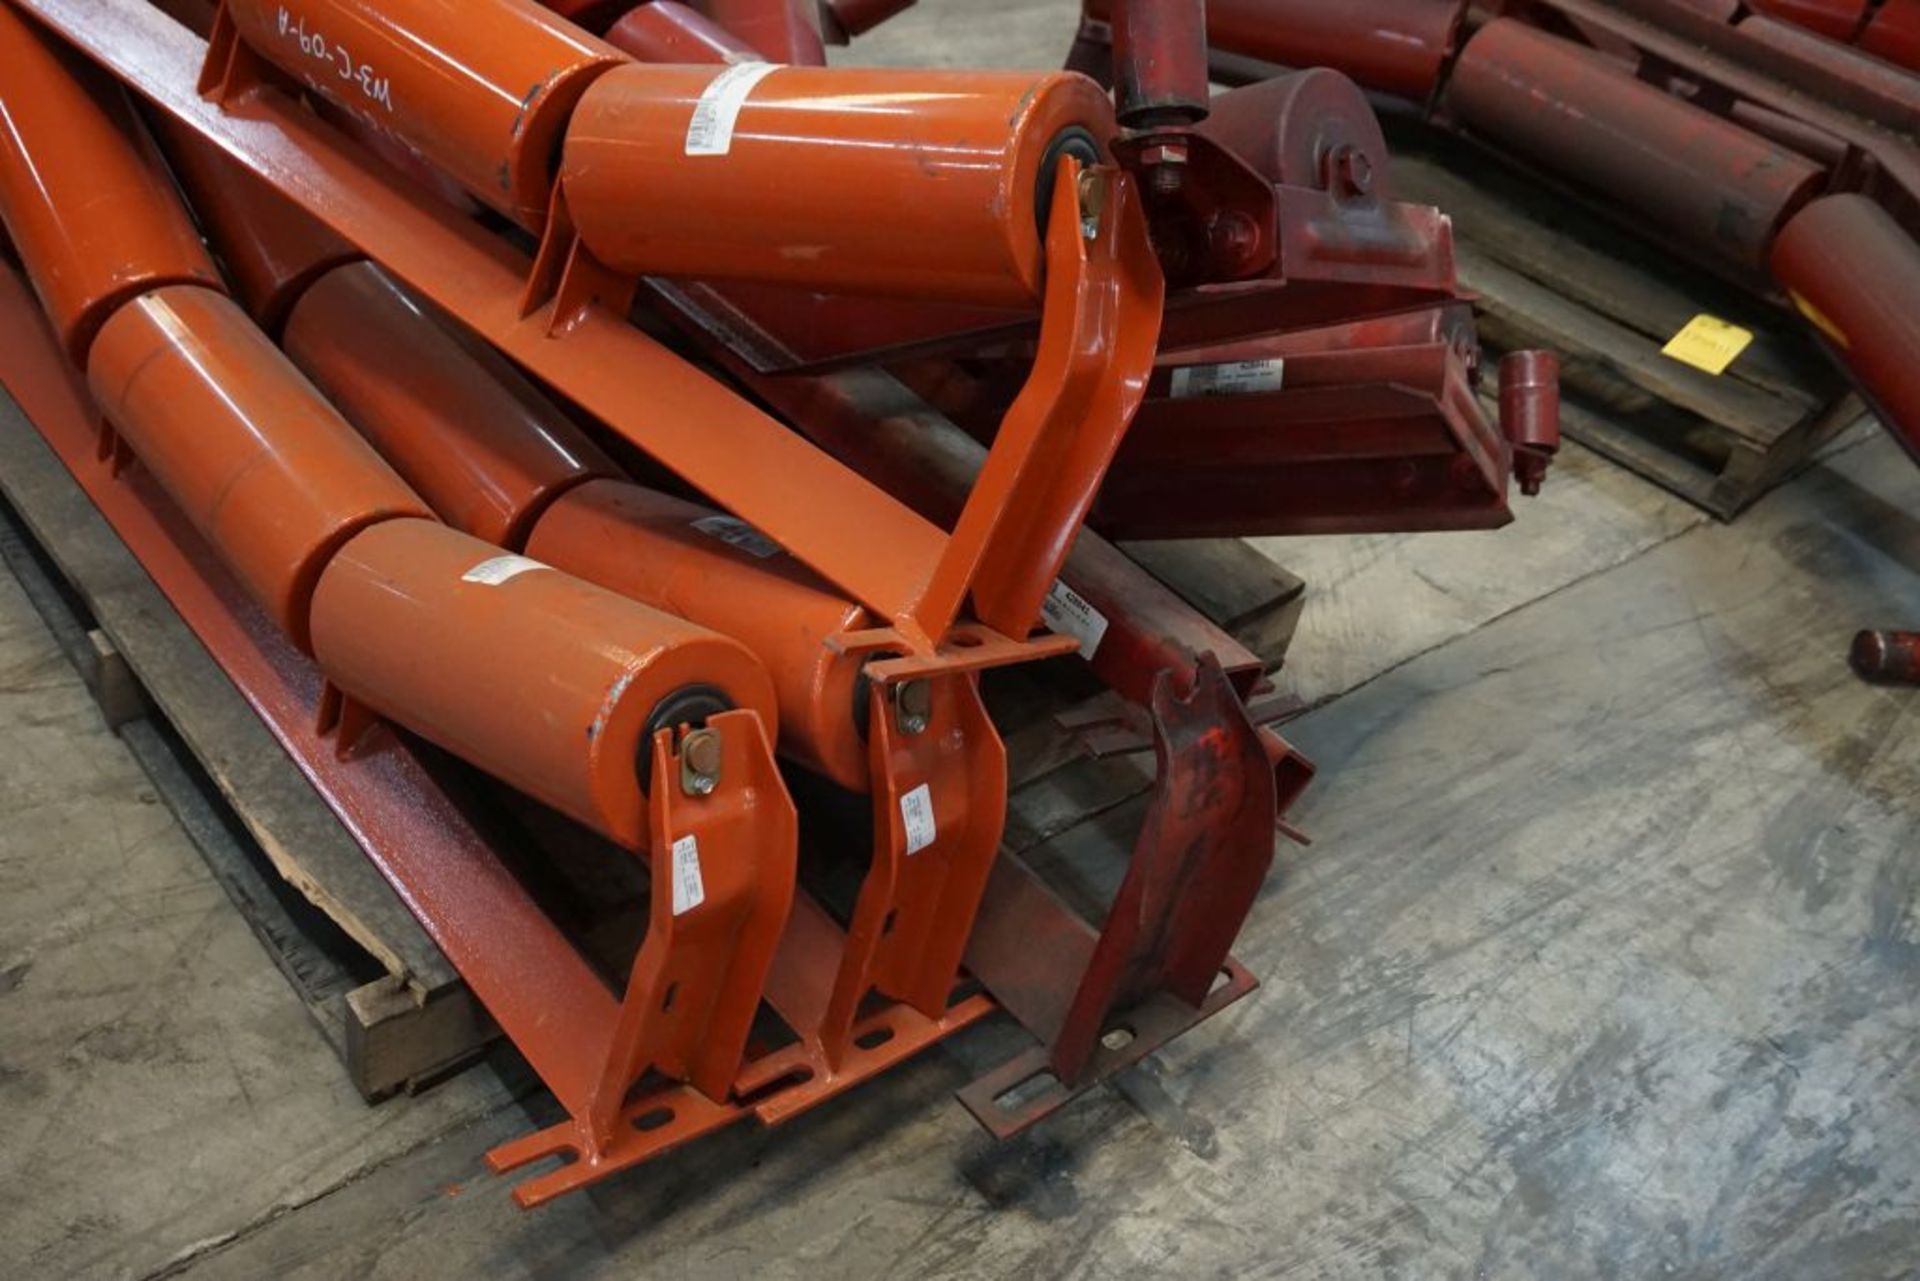 Lot of (6) 6"Diameter Impact Idlers|41" Working Width; 50" Overall Width|Lot Loading Fee: $5.00 - Image 2 of 5